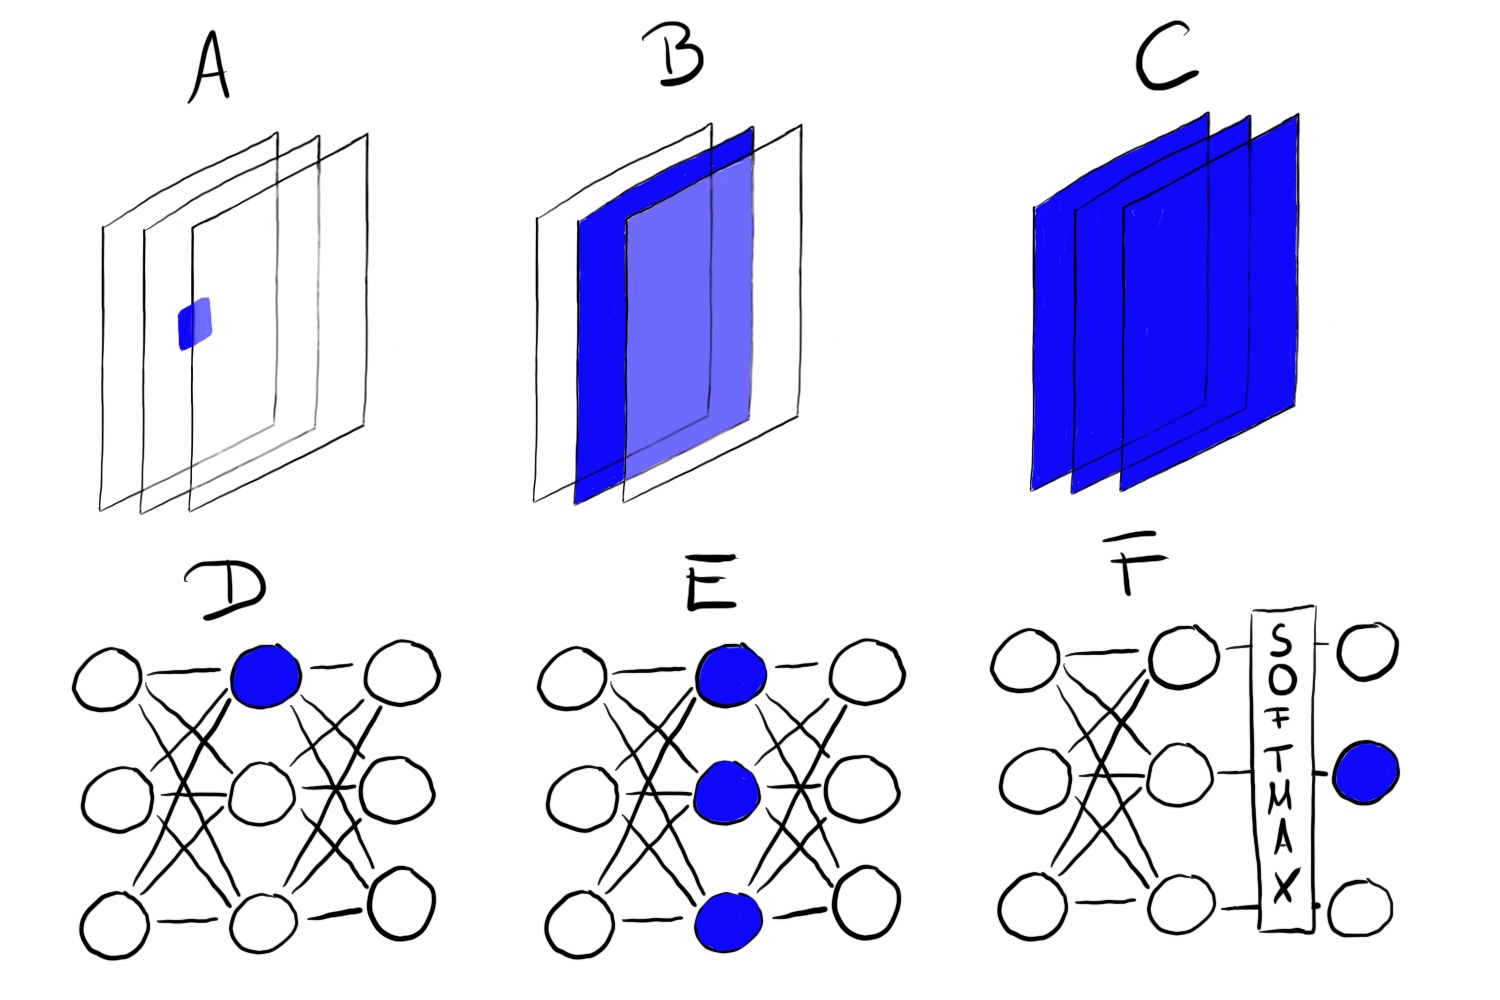 Feature visualization can be done for different units. A) Convolution neuron, B) Convolution channel, C) Convolution layer, D) Neuron, E) Hidden layer, F) Class probability neuron (or corresponding pre-softmax neuron)